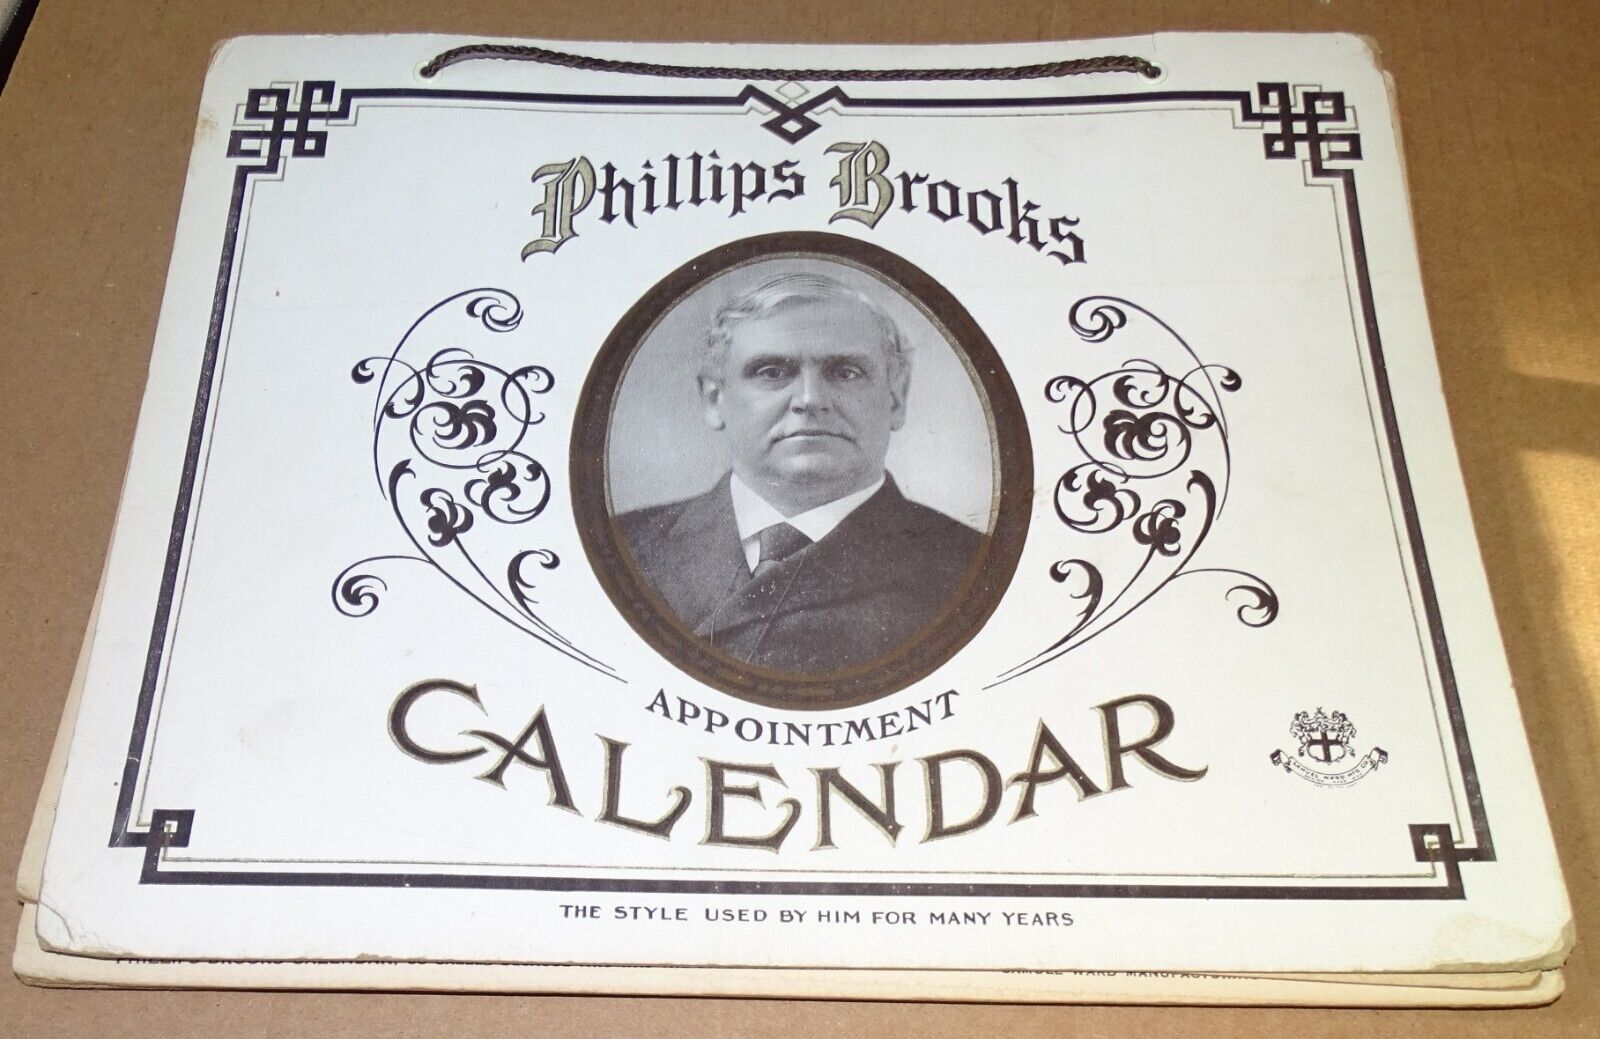 Phillips Brooks Appointment Calendar 1938 (carboard pages) filled in daily/used